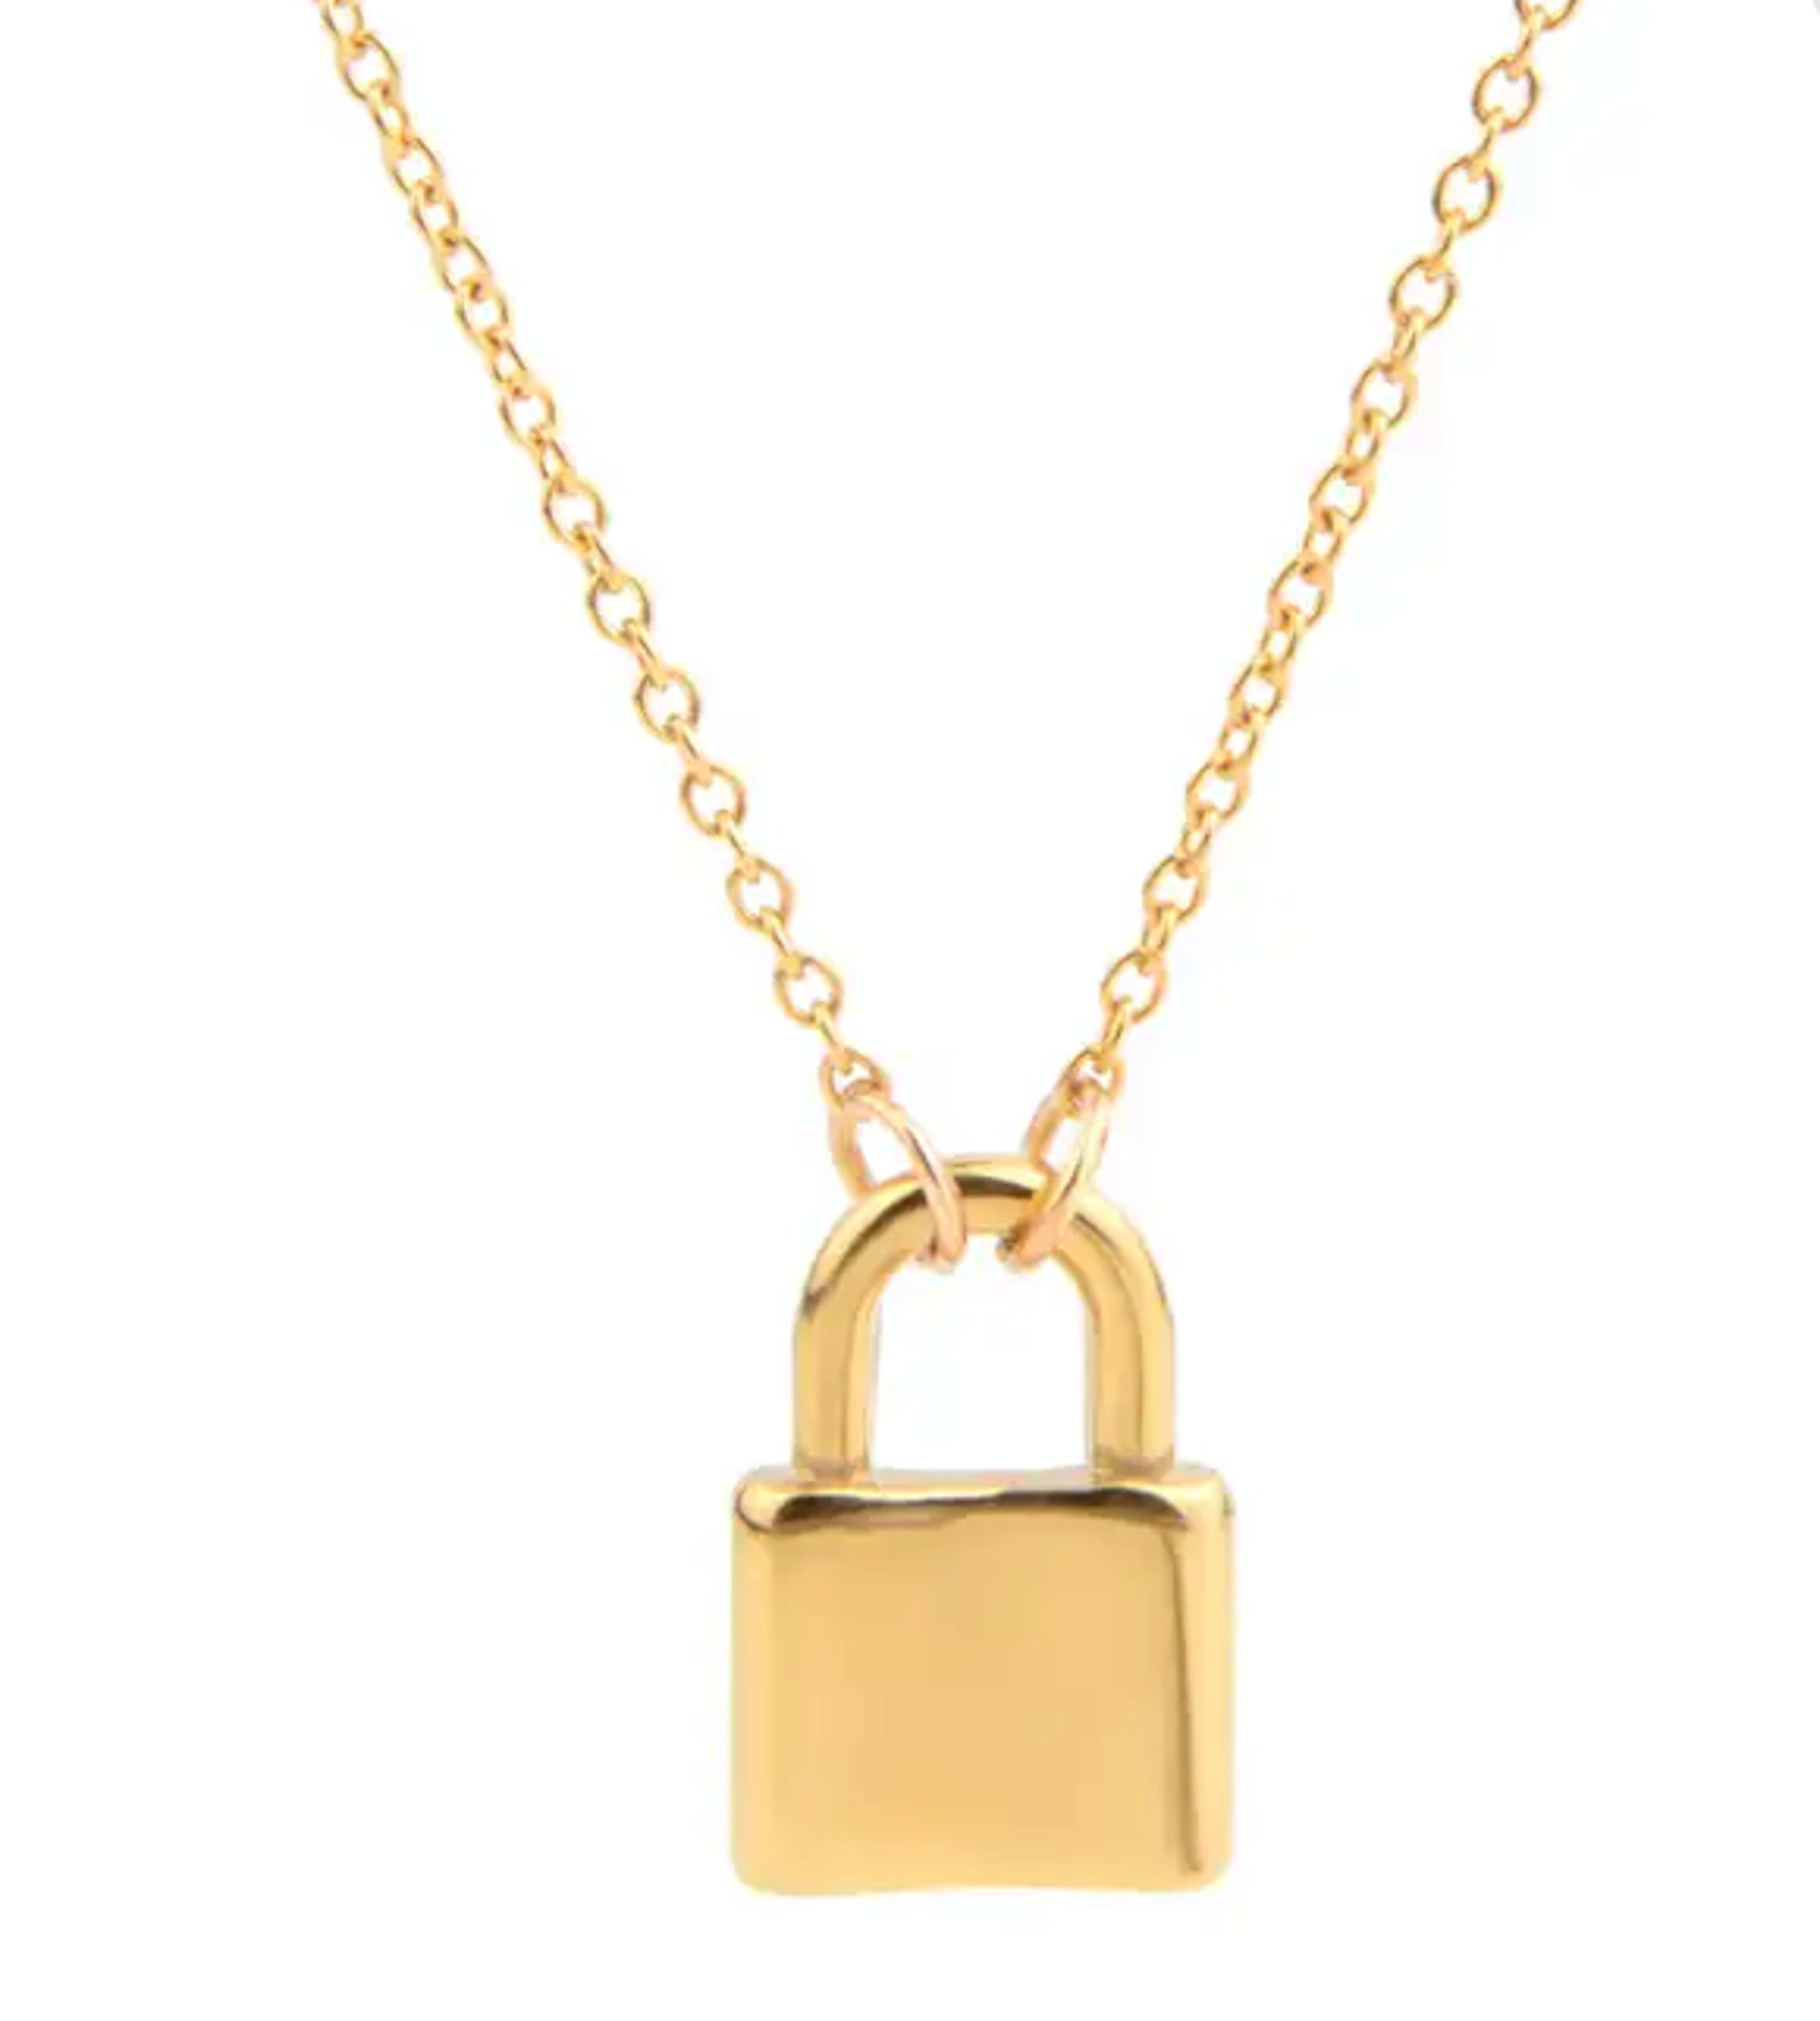 Alternate View 3 of NEW KimmieBBags Padlock Charm Necklace 061923